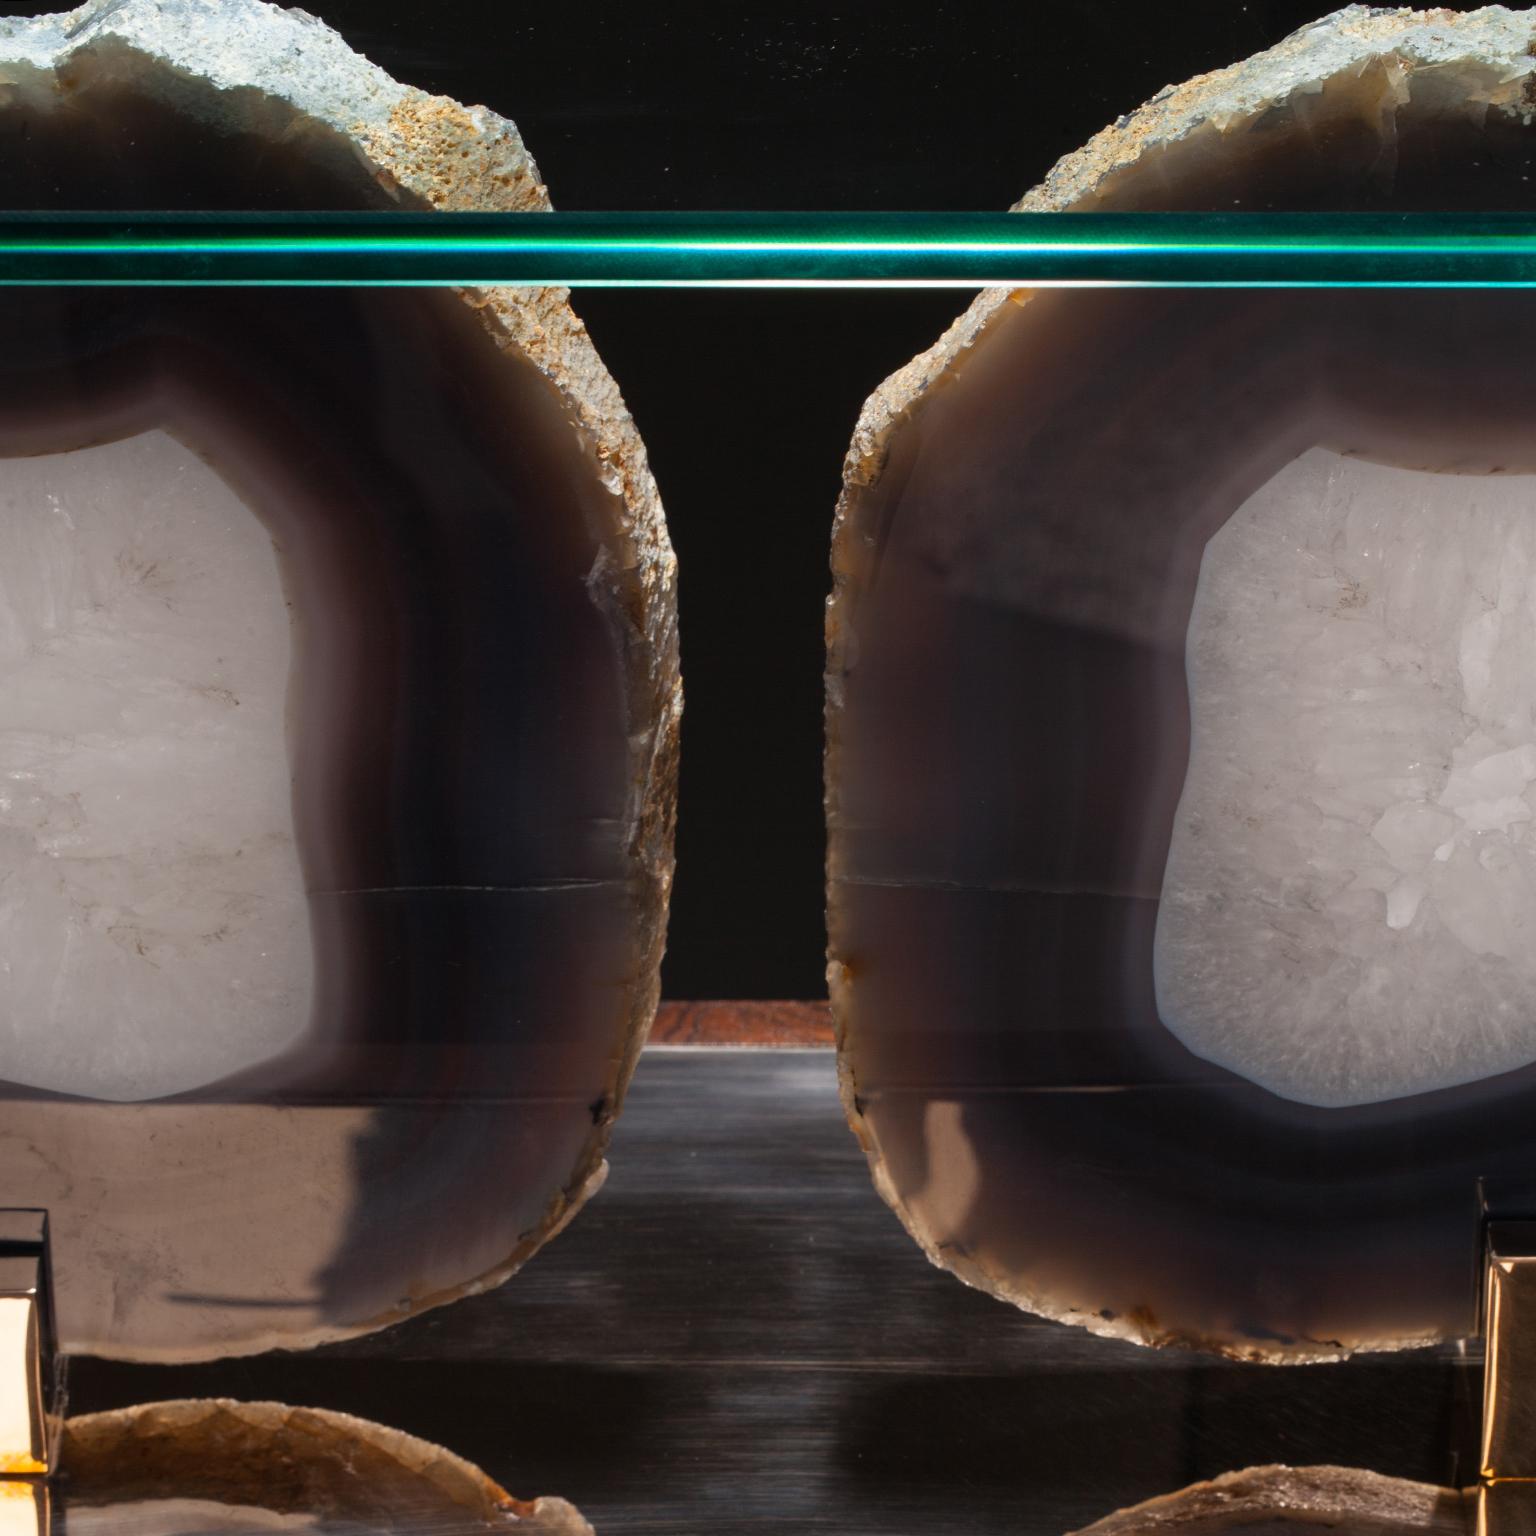 Paris Console 2

Brazilian agate is revered around the world for its clarity and color. In Studio Greytak’s Paris Console 2 a bookended pair of icy blue agates are set atop a mirror finish of polished bronze like summer clouds floating above a clear